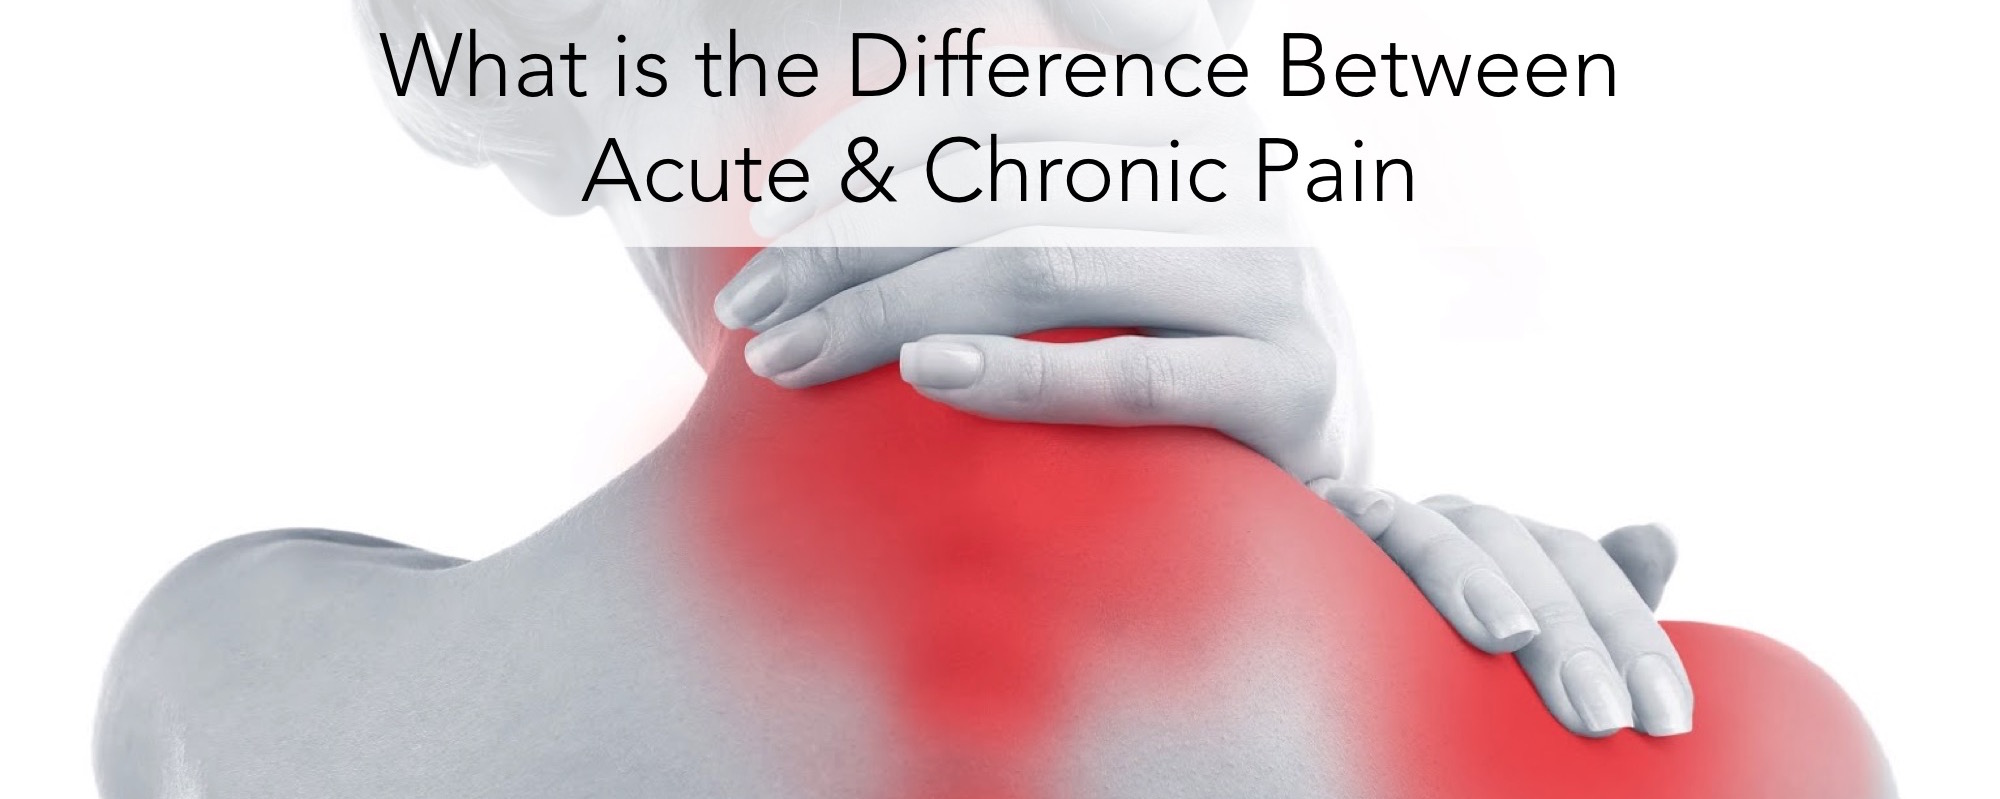 What is the Difference Between Acute and Chronic Pain?